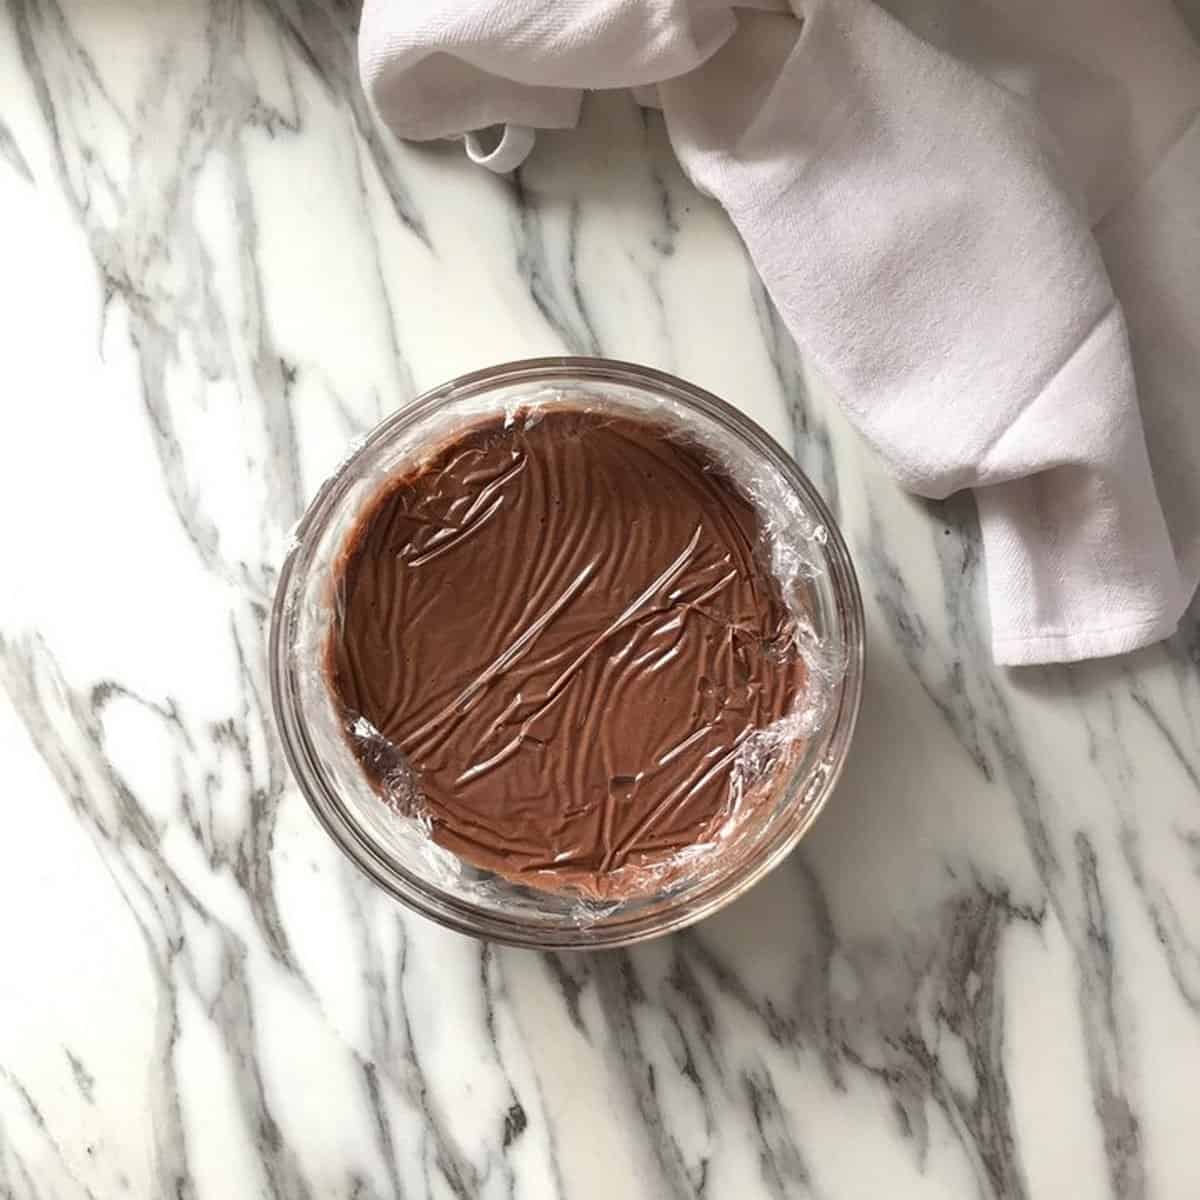 Cellophane is placed directly on the surface of the chocolate pudding.